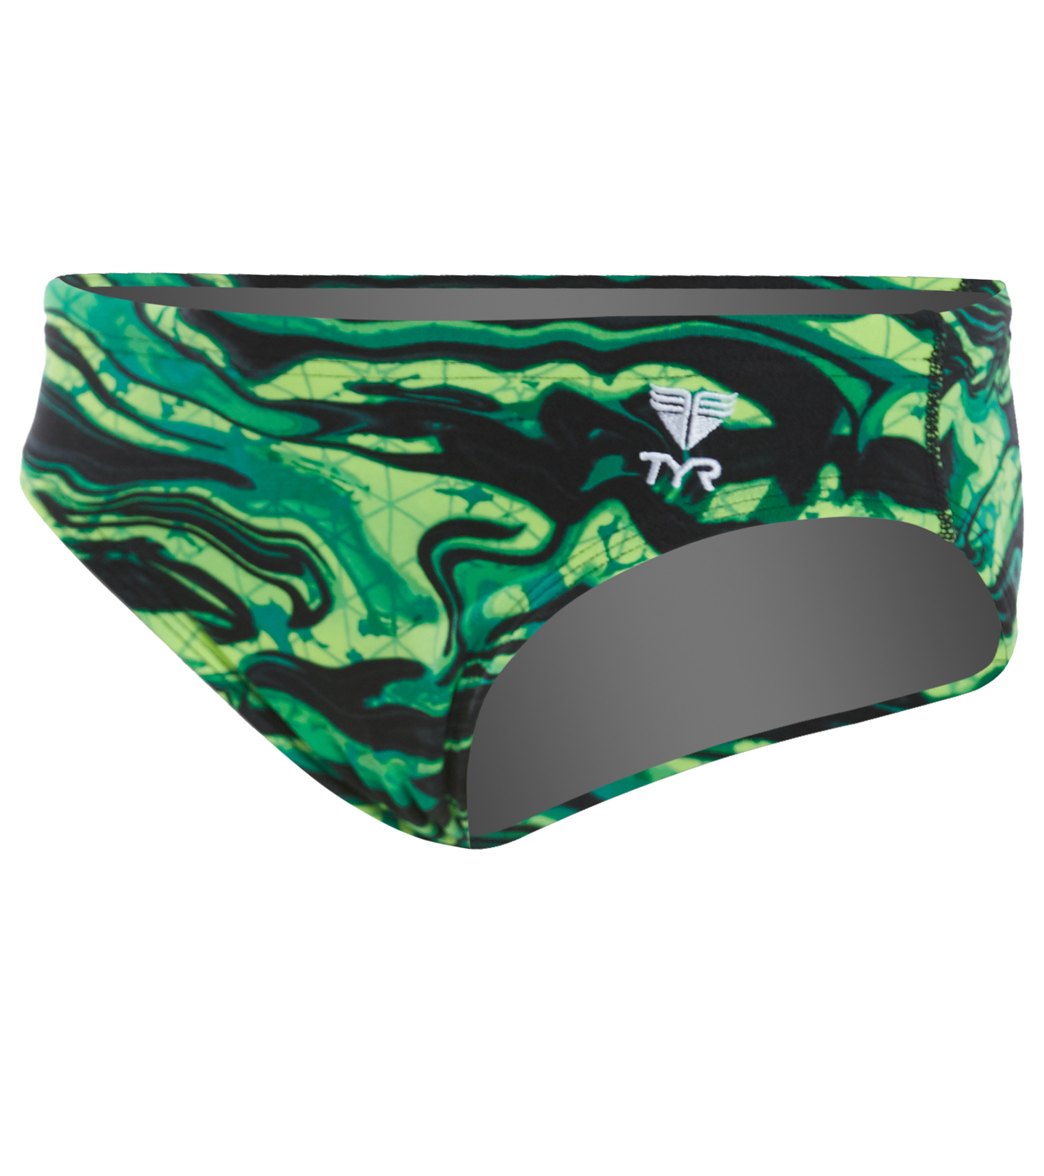 TYR Miramar Allover Racer Brief Swimsuit - Green 24 Polyester/Spandex - Swimoutlet.com